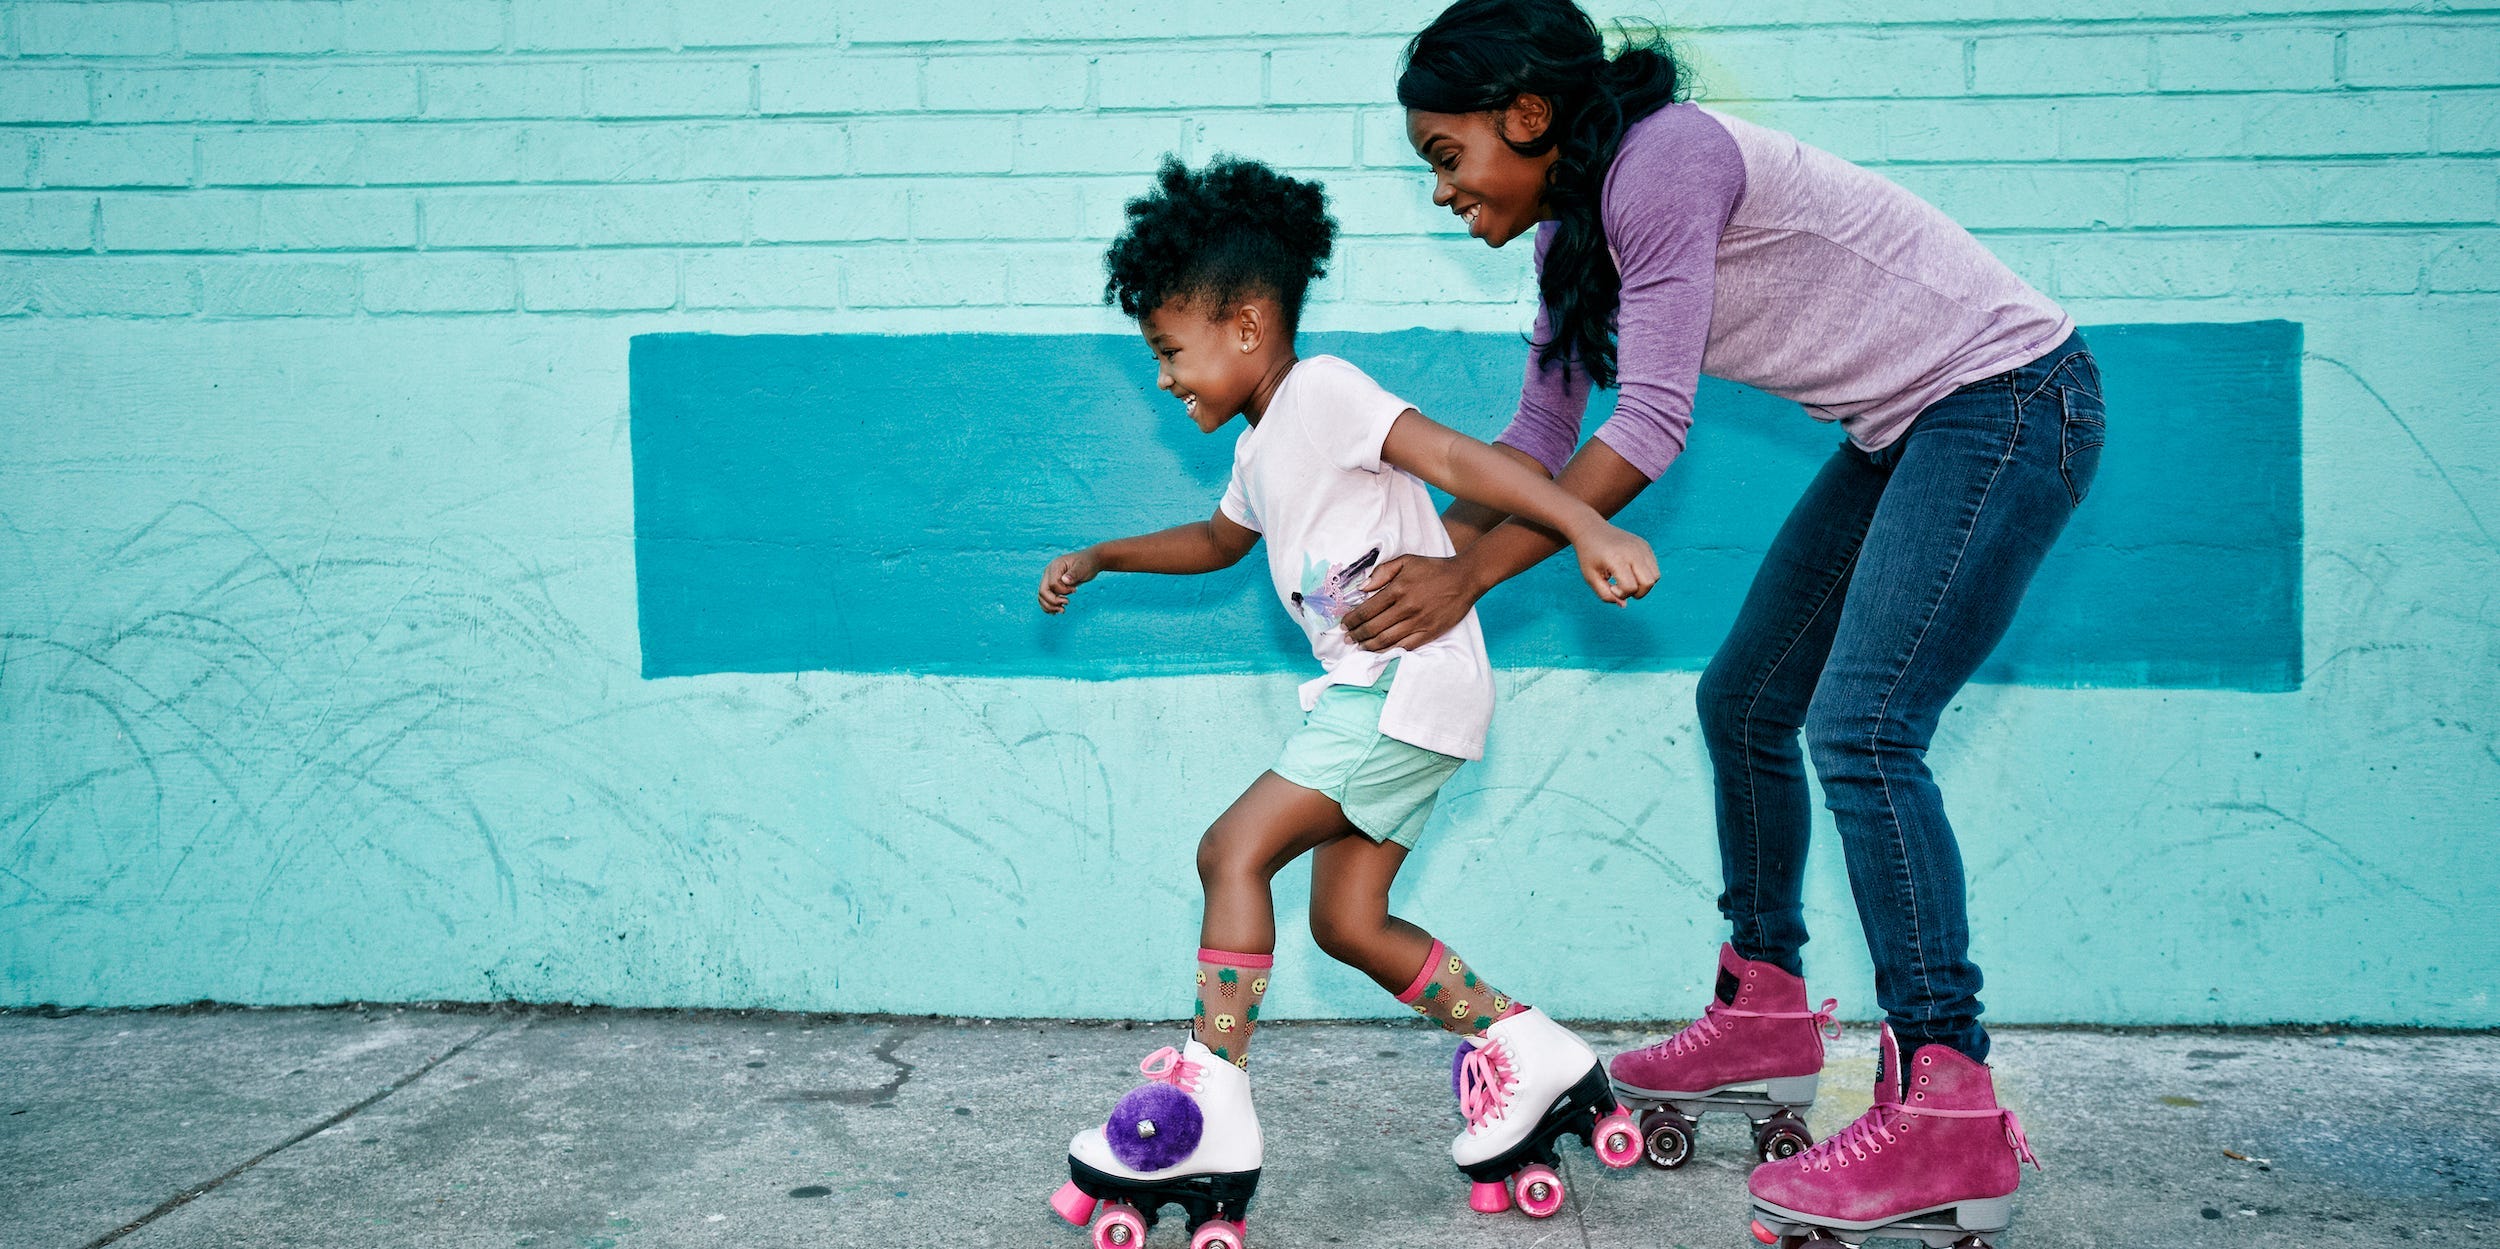 A mother supports her daughter's waist as they roller skate.